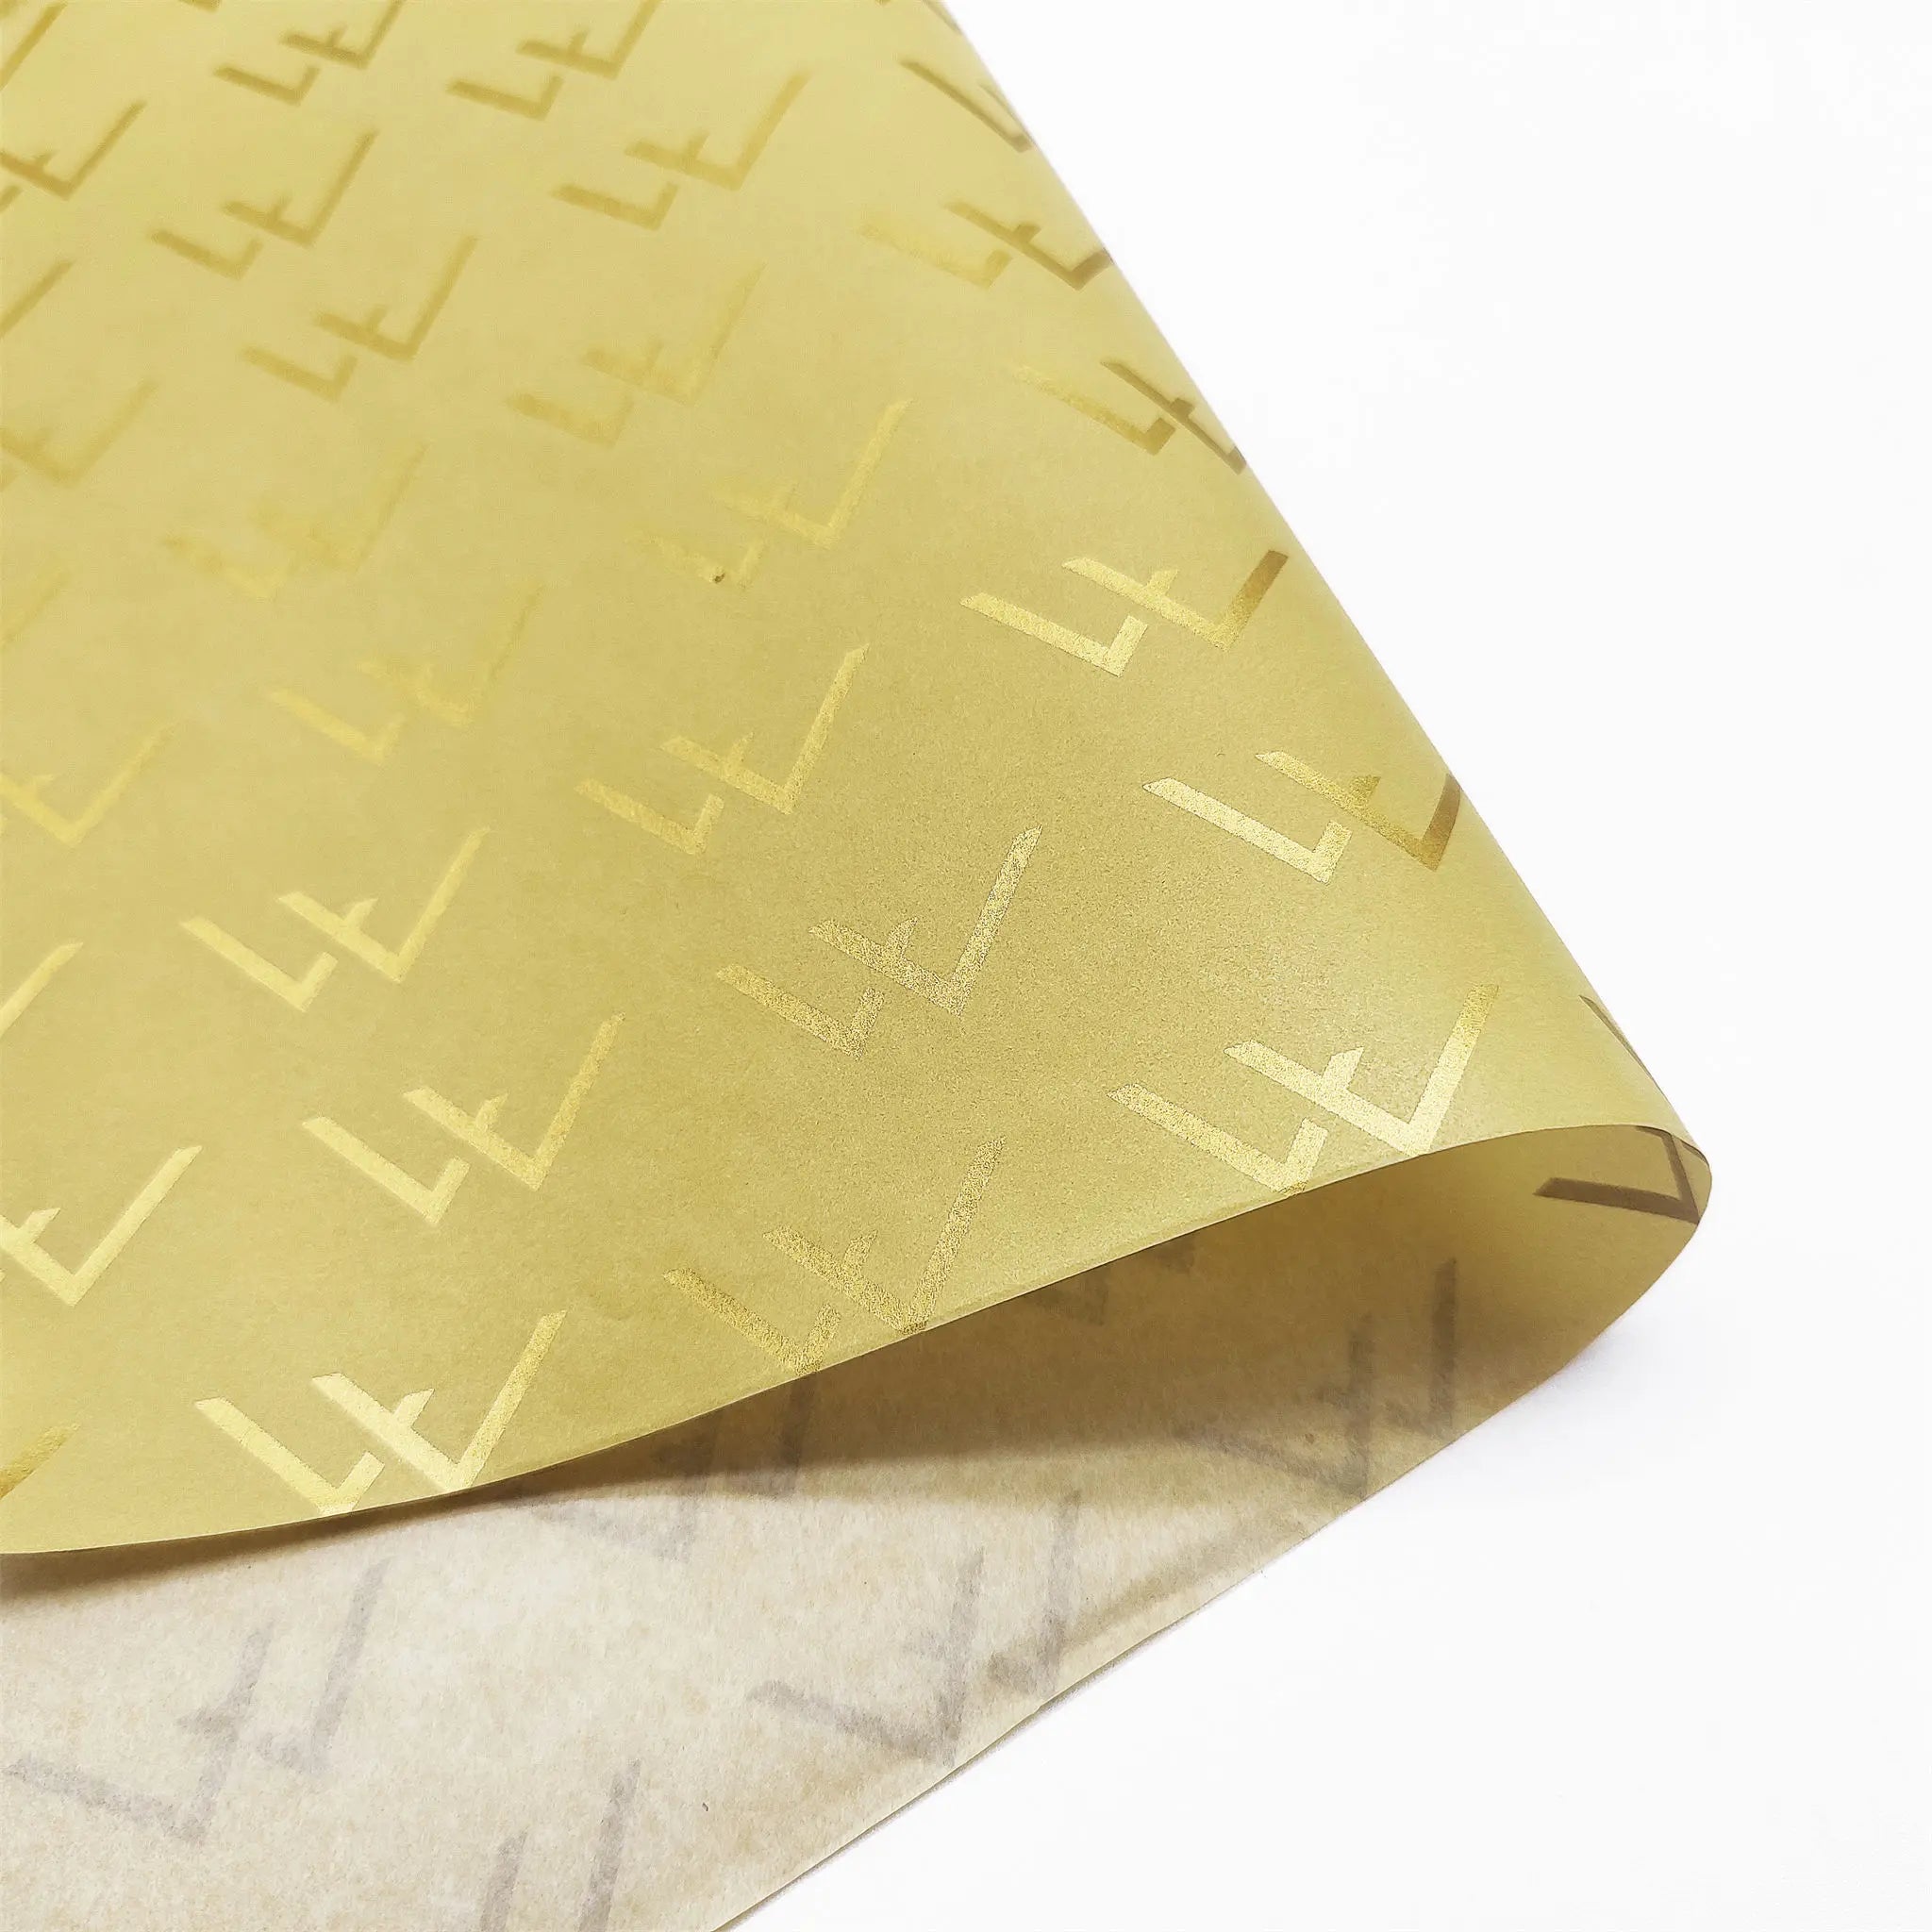 custom yellow 30lb tissue paper with gold logo